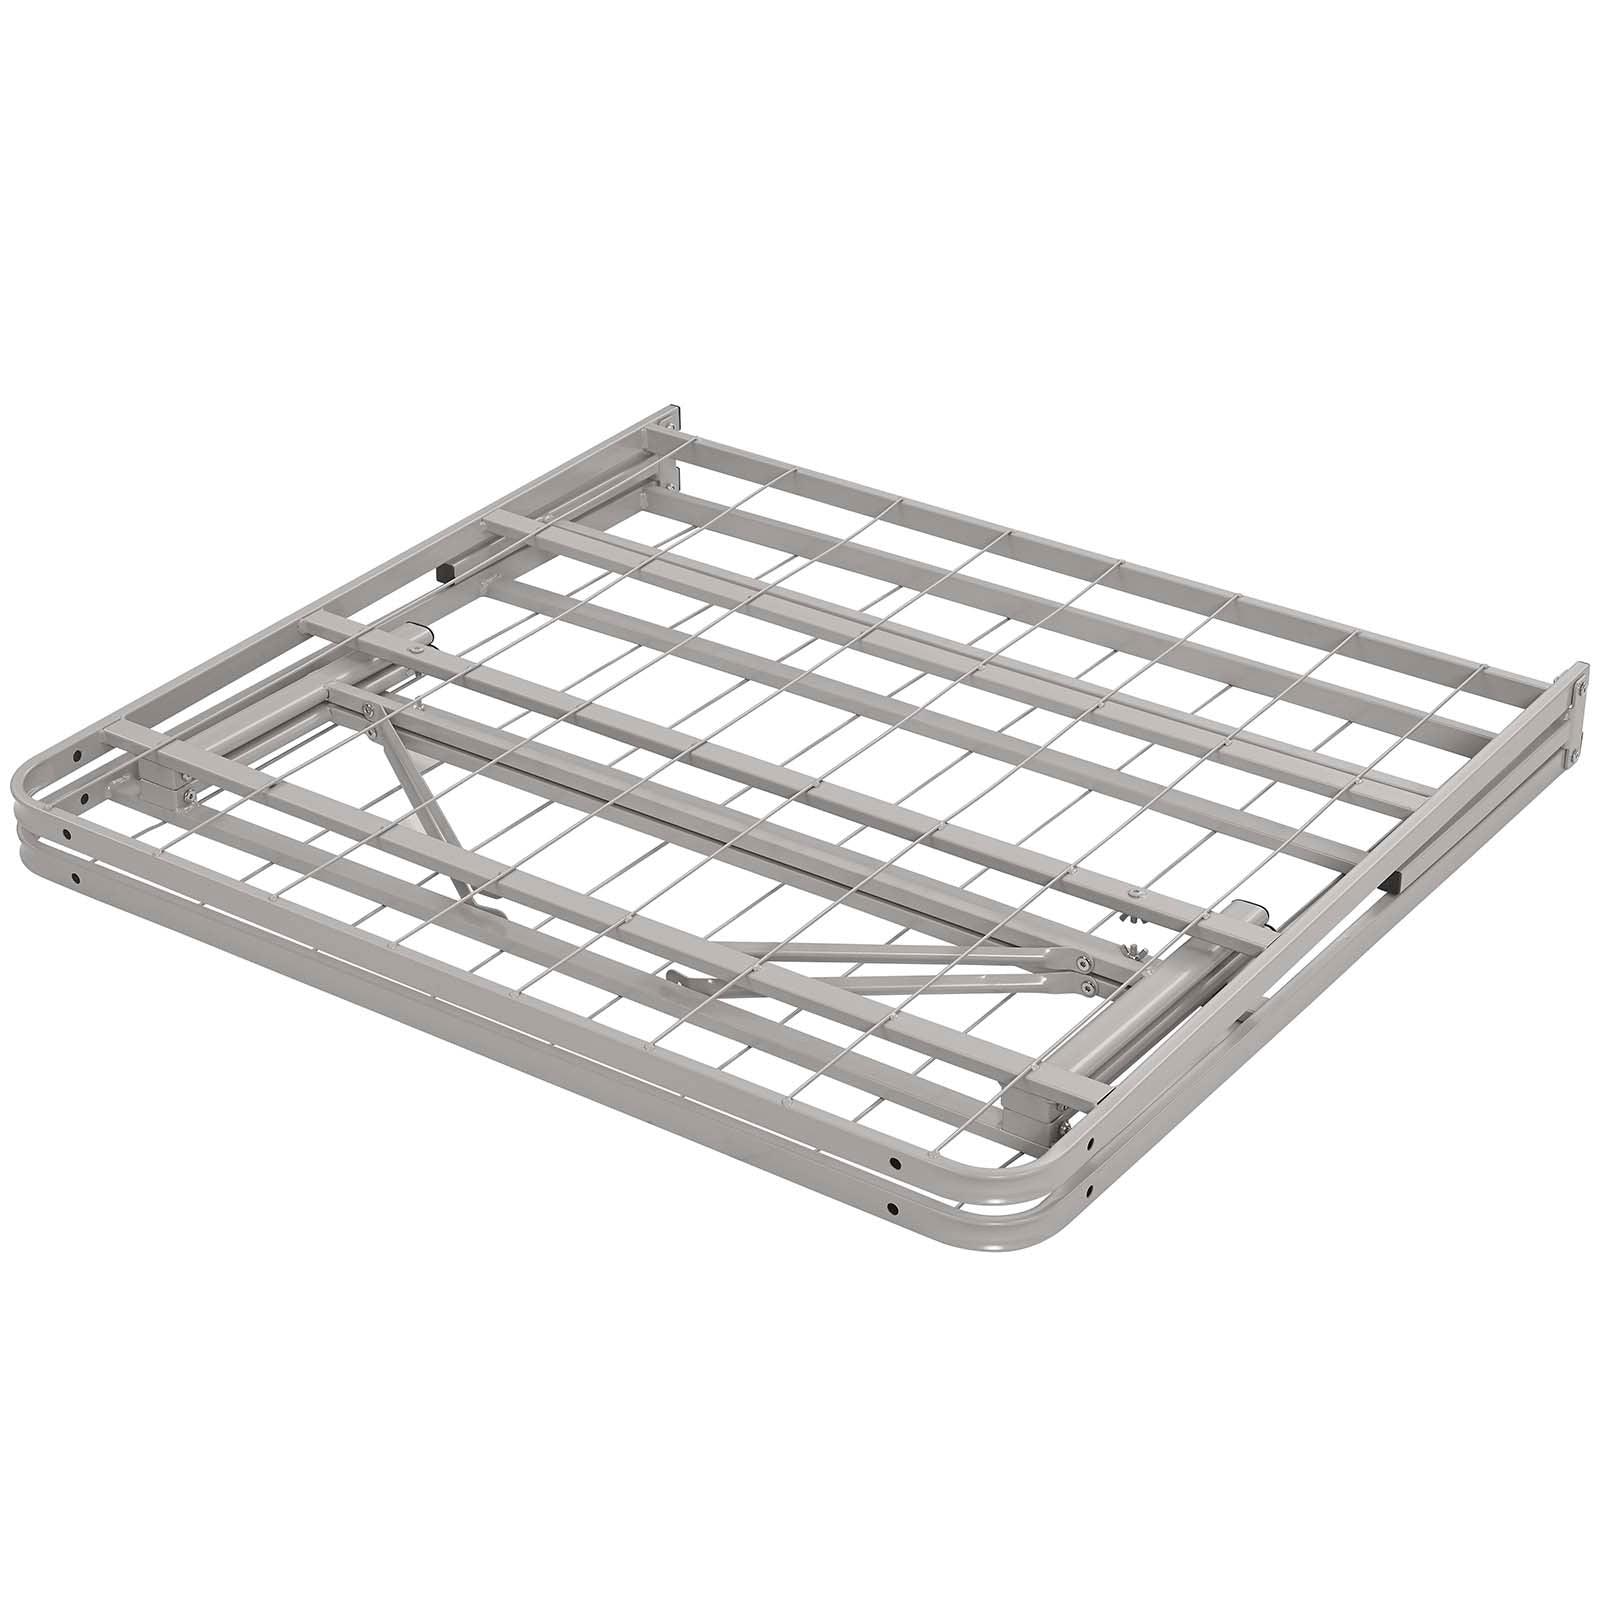 Modway Beds - Horizon Twin Stainless Steel Bed Frame Gray